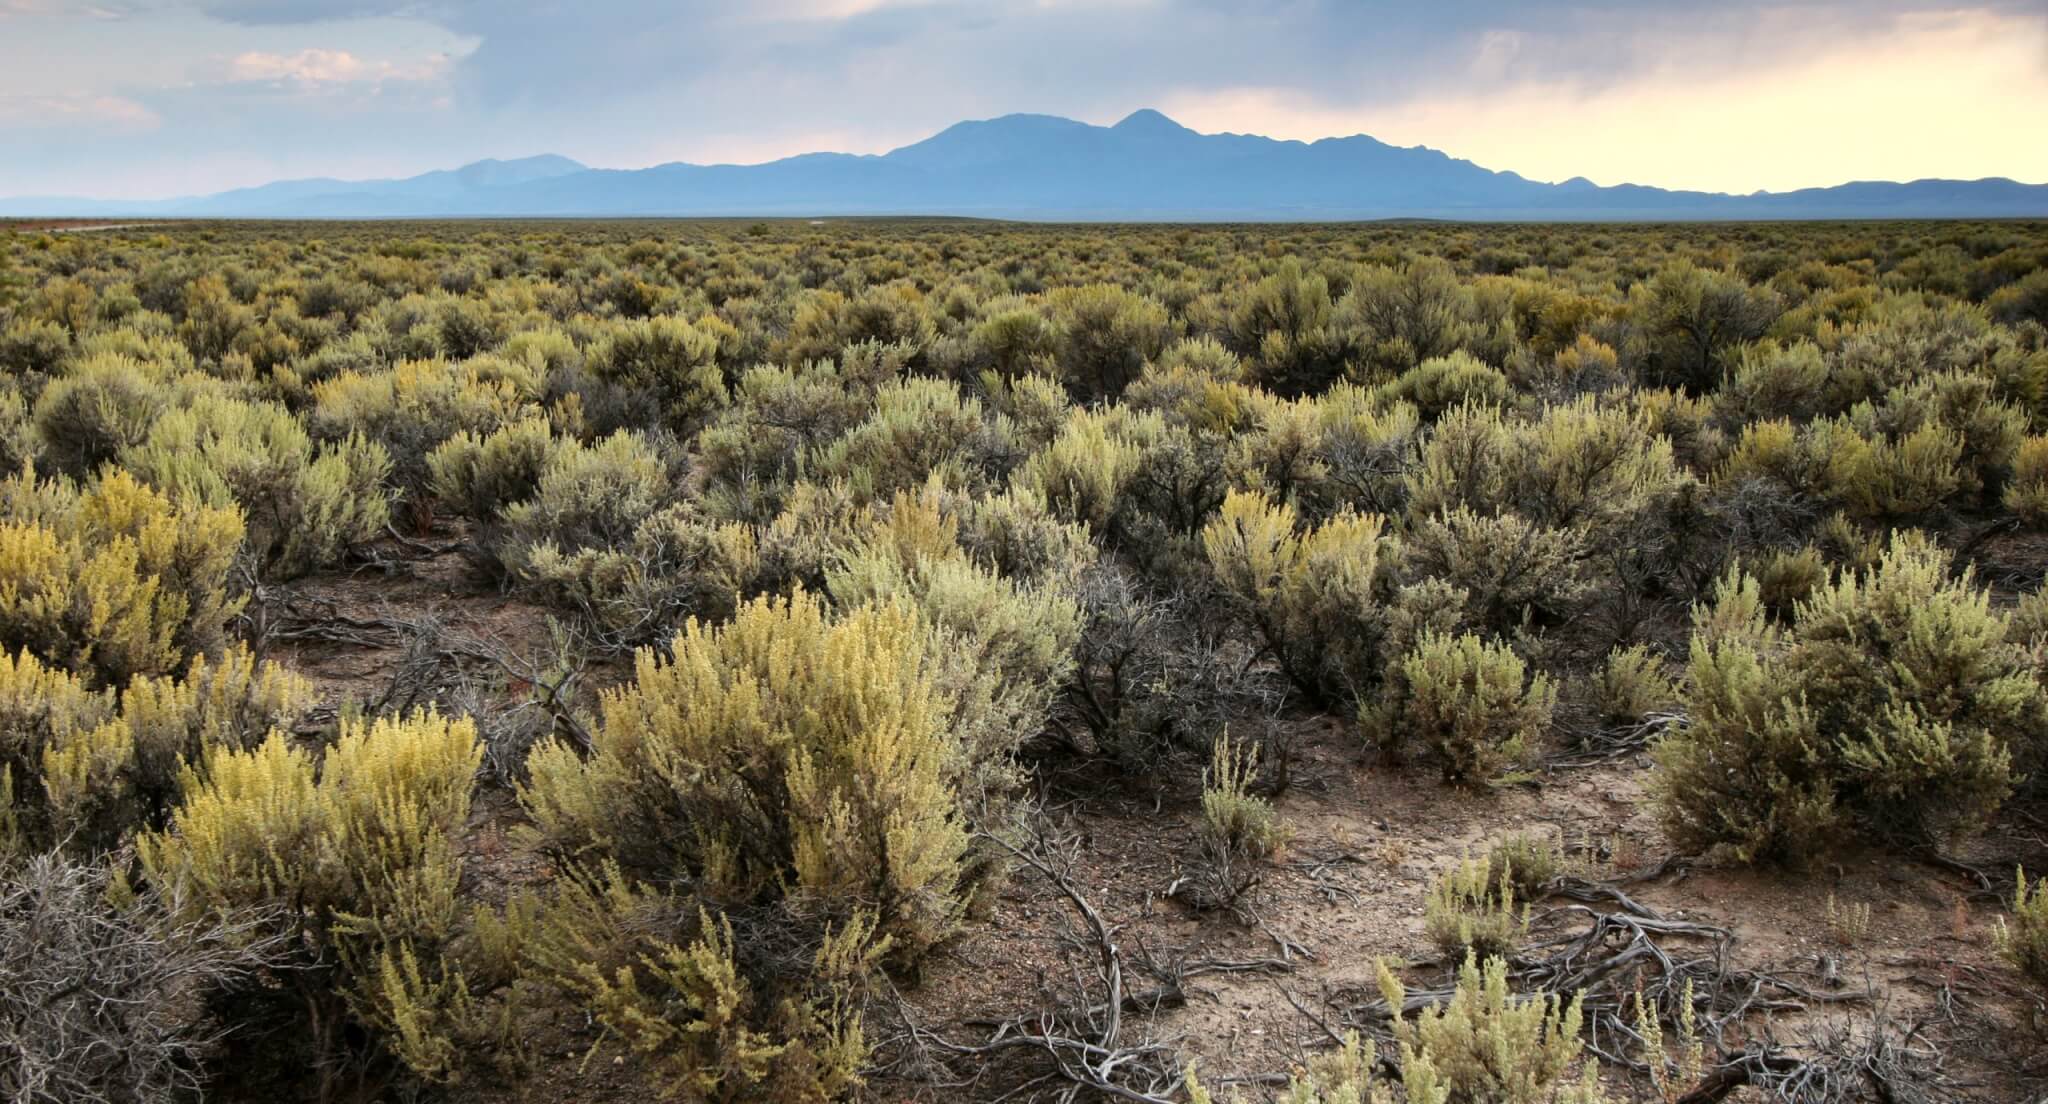 The landscape that a Sage-Grouse needs